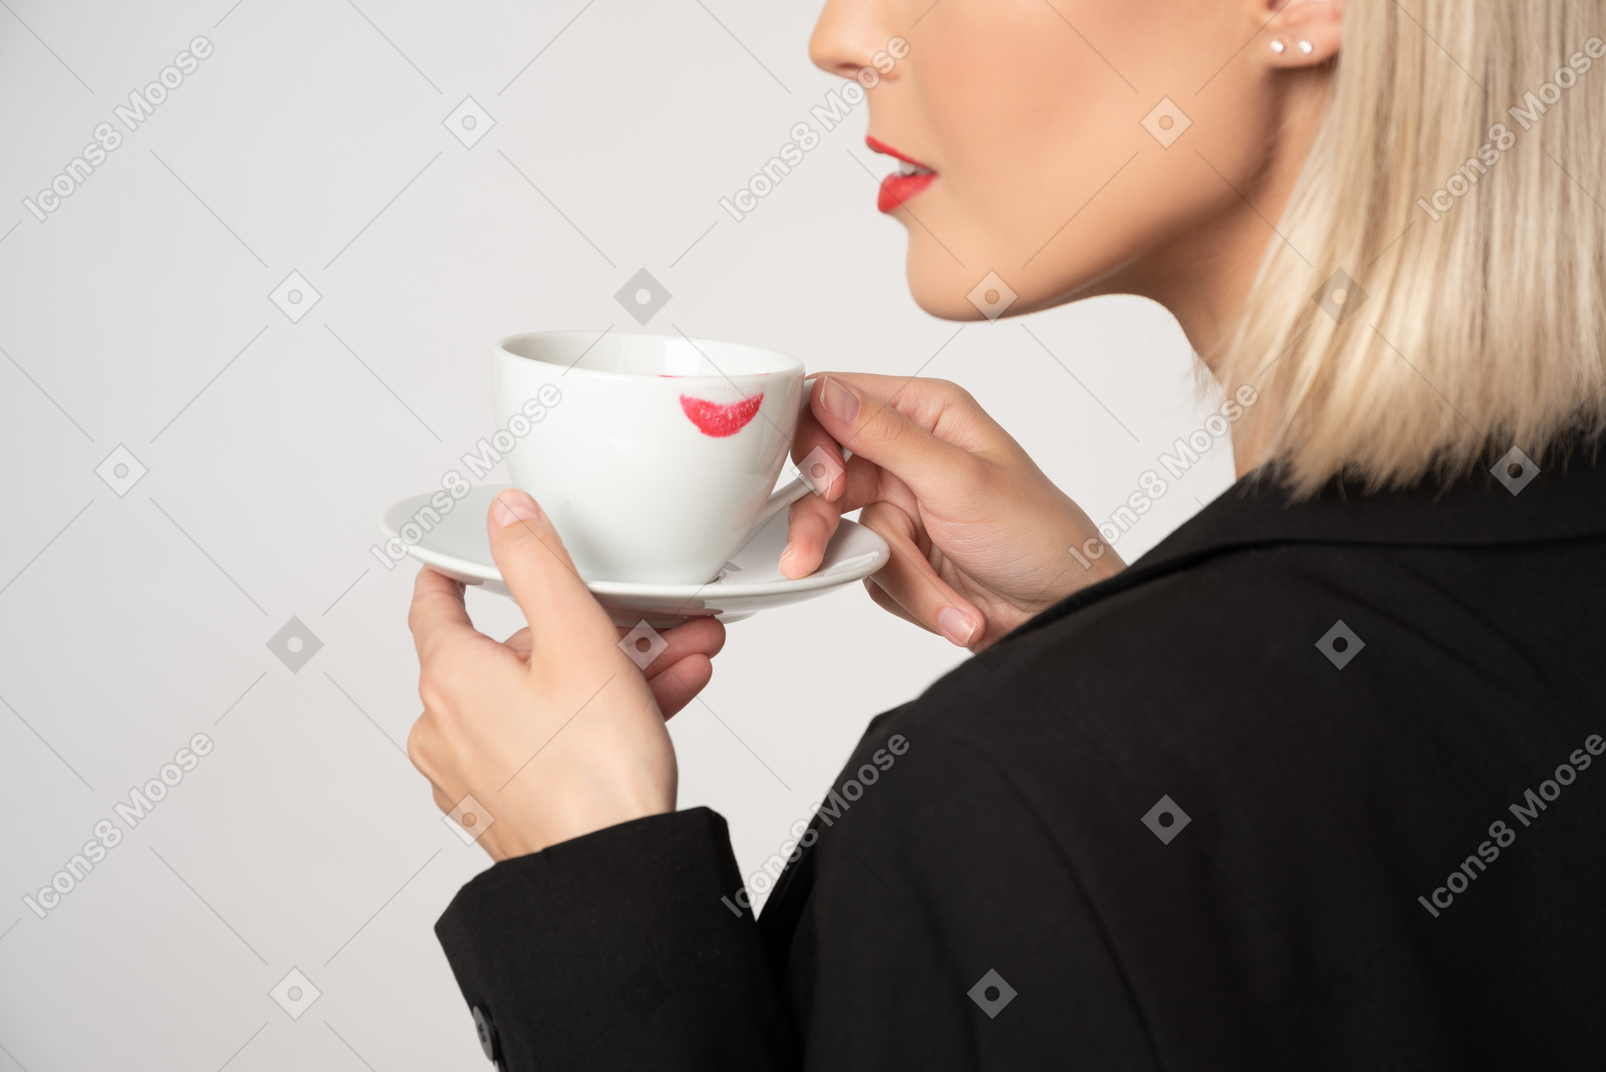 A cropped shot of a young woman holding a coffee cup with a lipstick stain on it